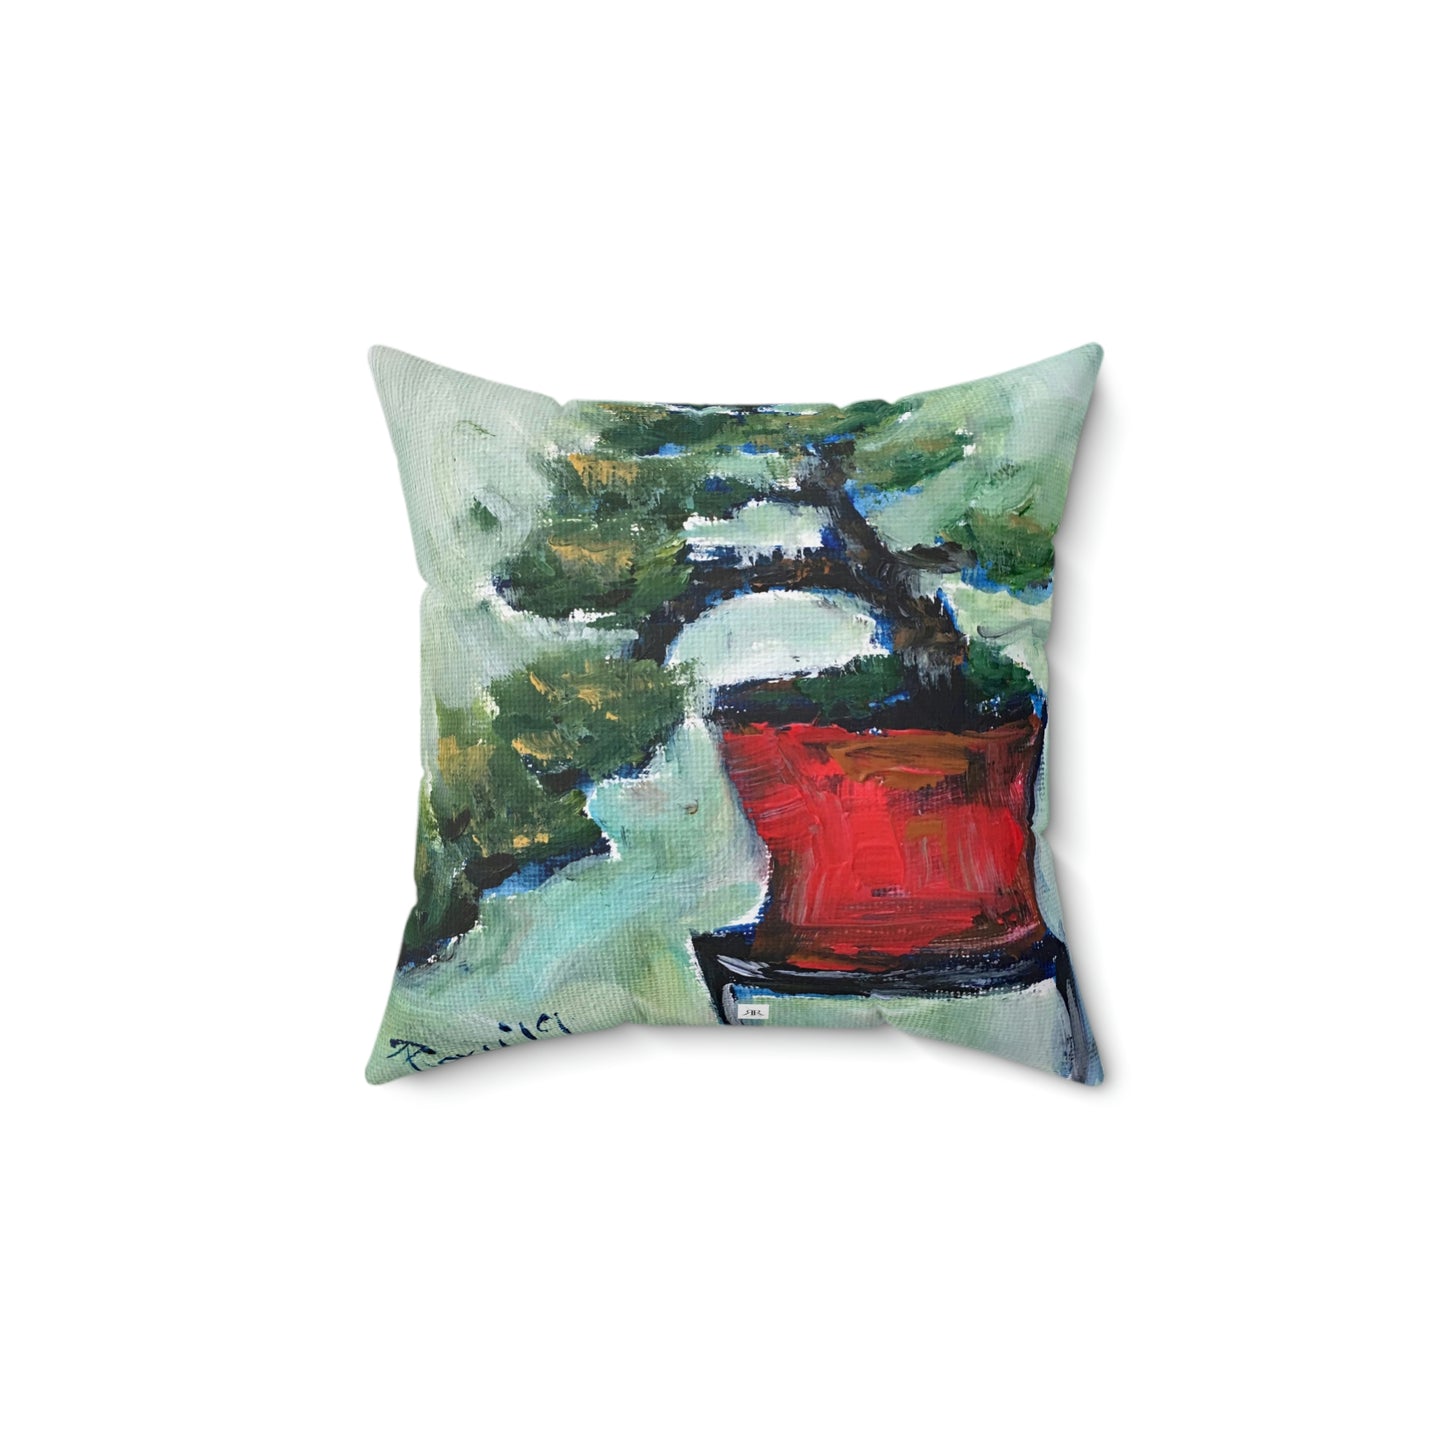 Bonsai in a Red Pot Indoor Spun Polyester Square Pillow